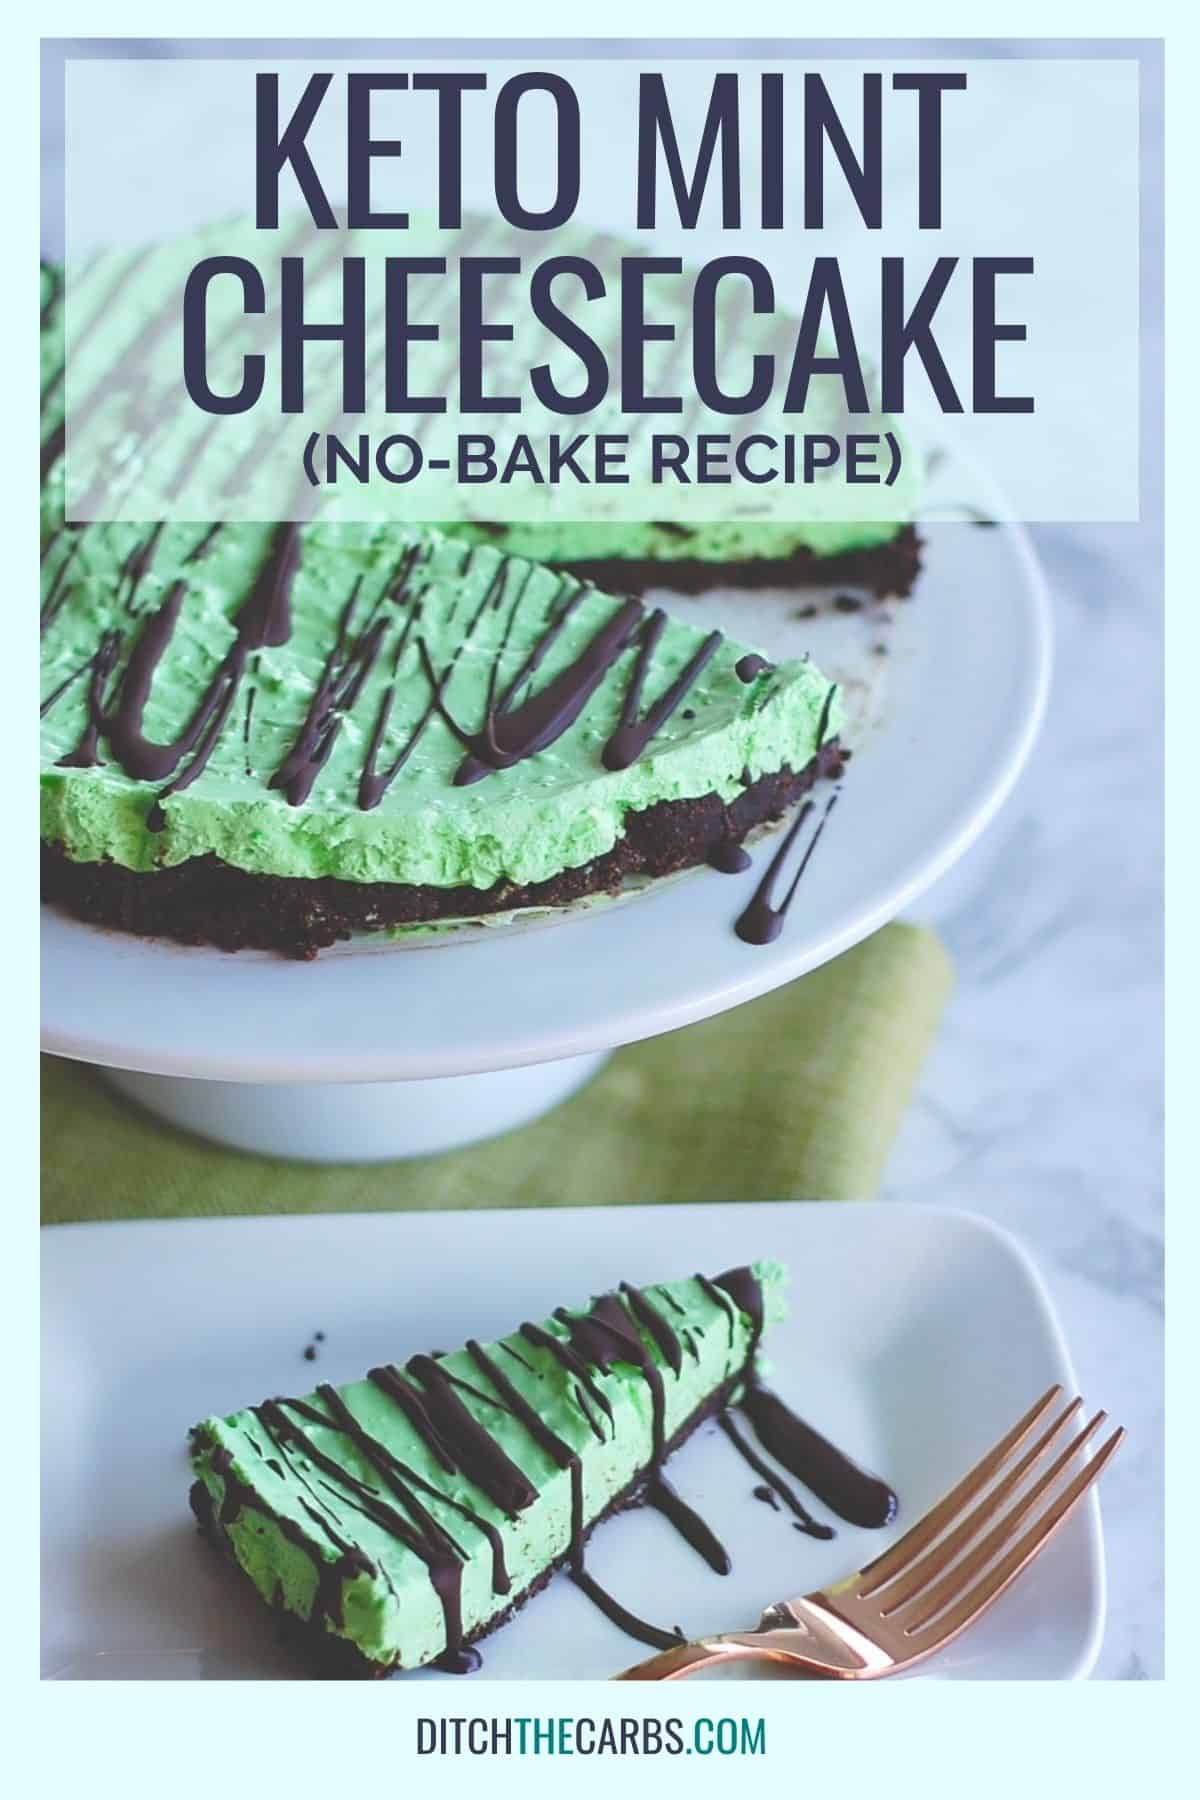 No-Bake Sugar-Free Mint Cheesecake drizzled with chocolate and served on a white cake stand